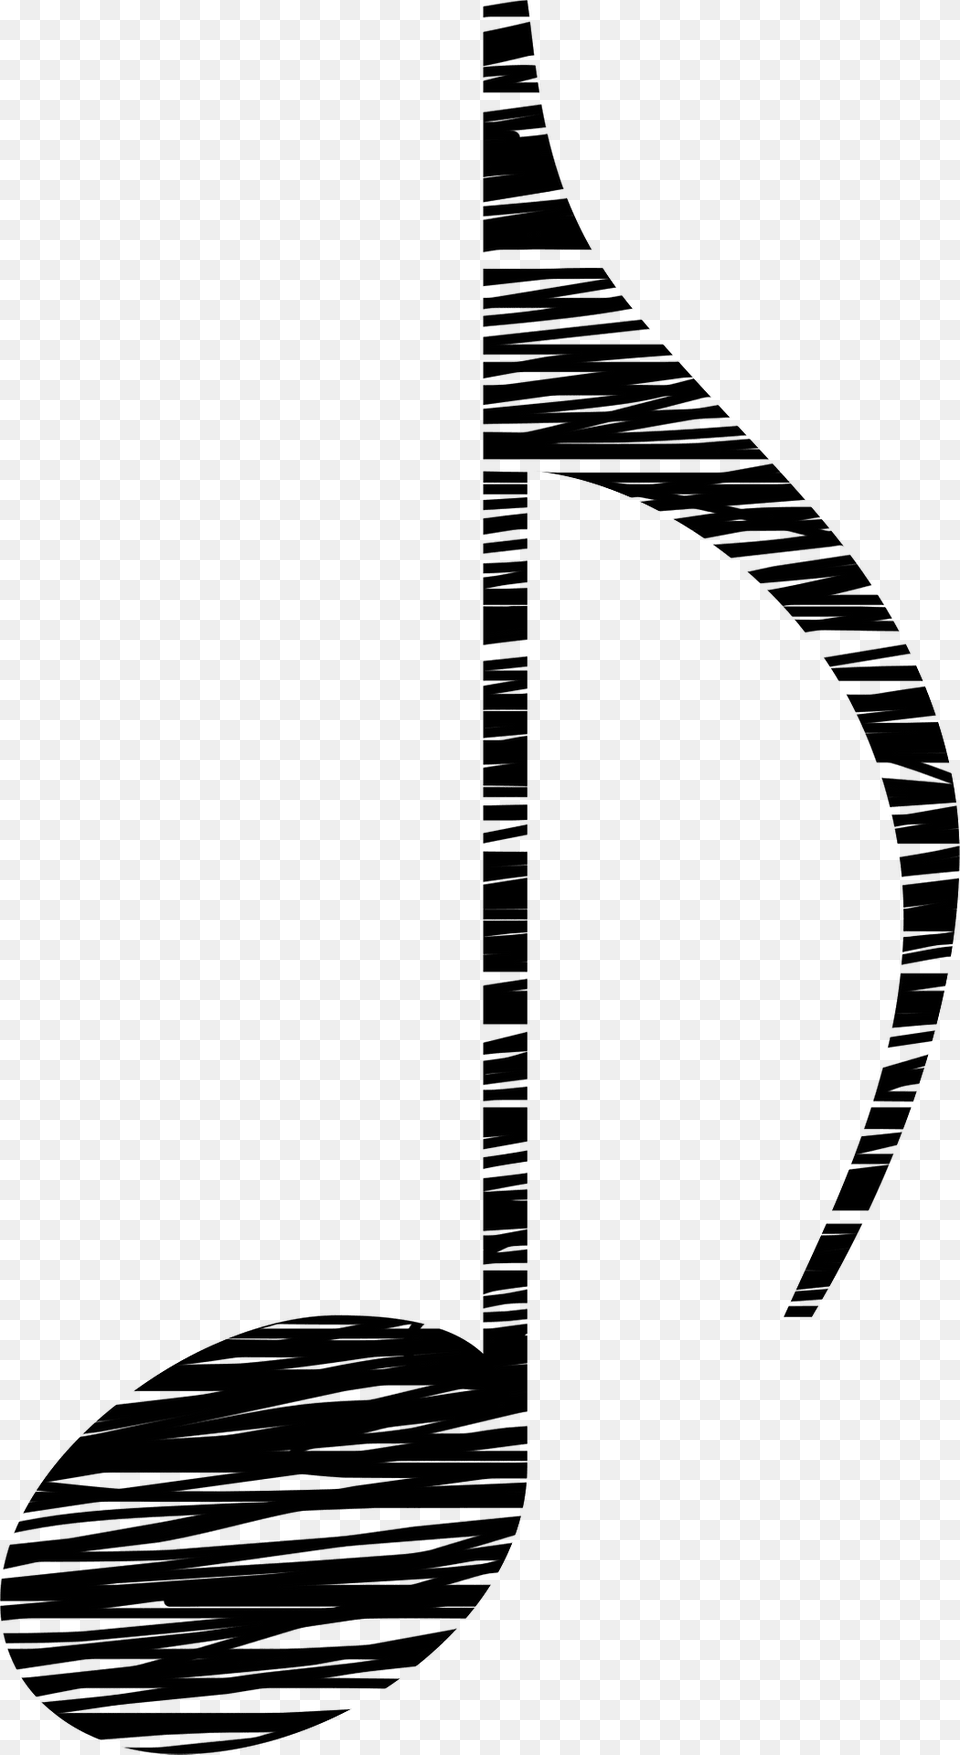 Stylized Music Note Clipart, Cutlery Png Image